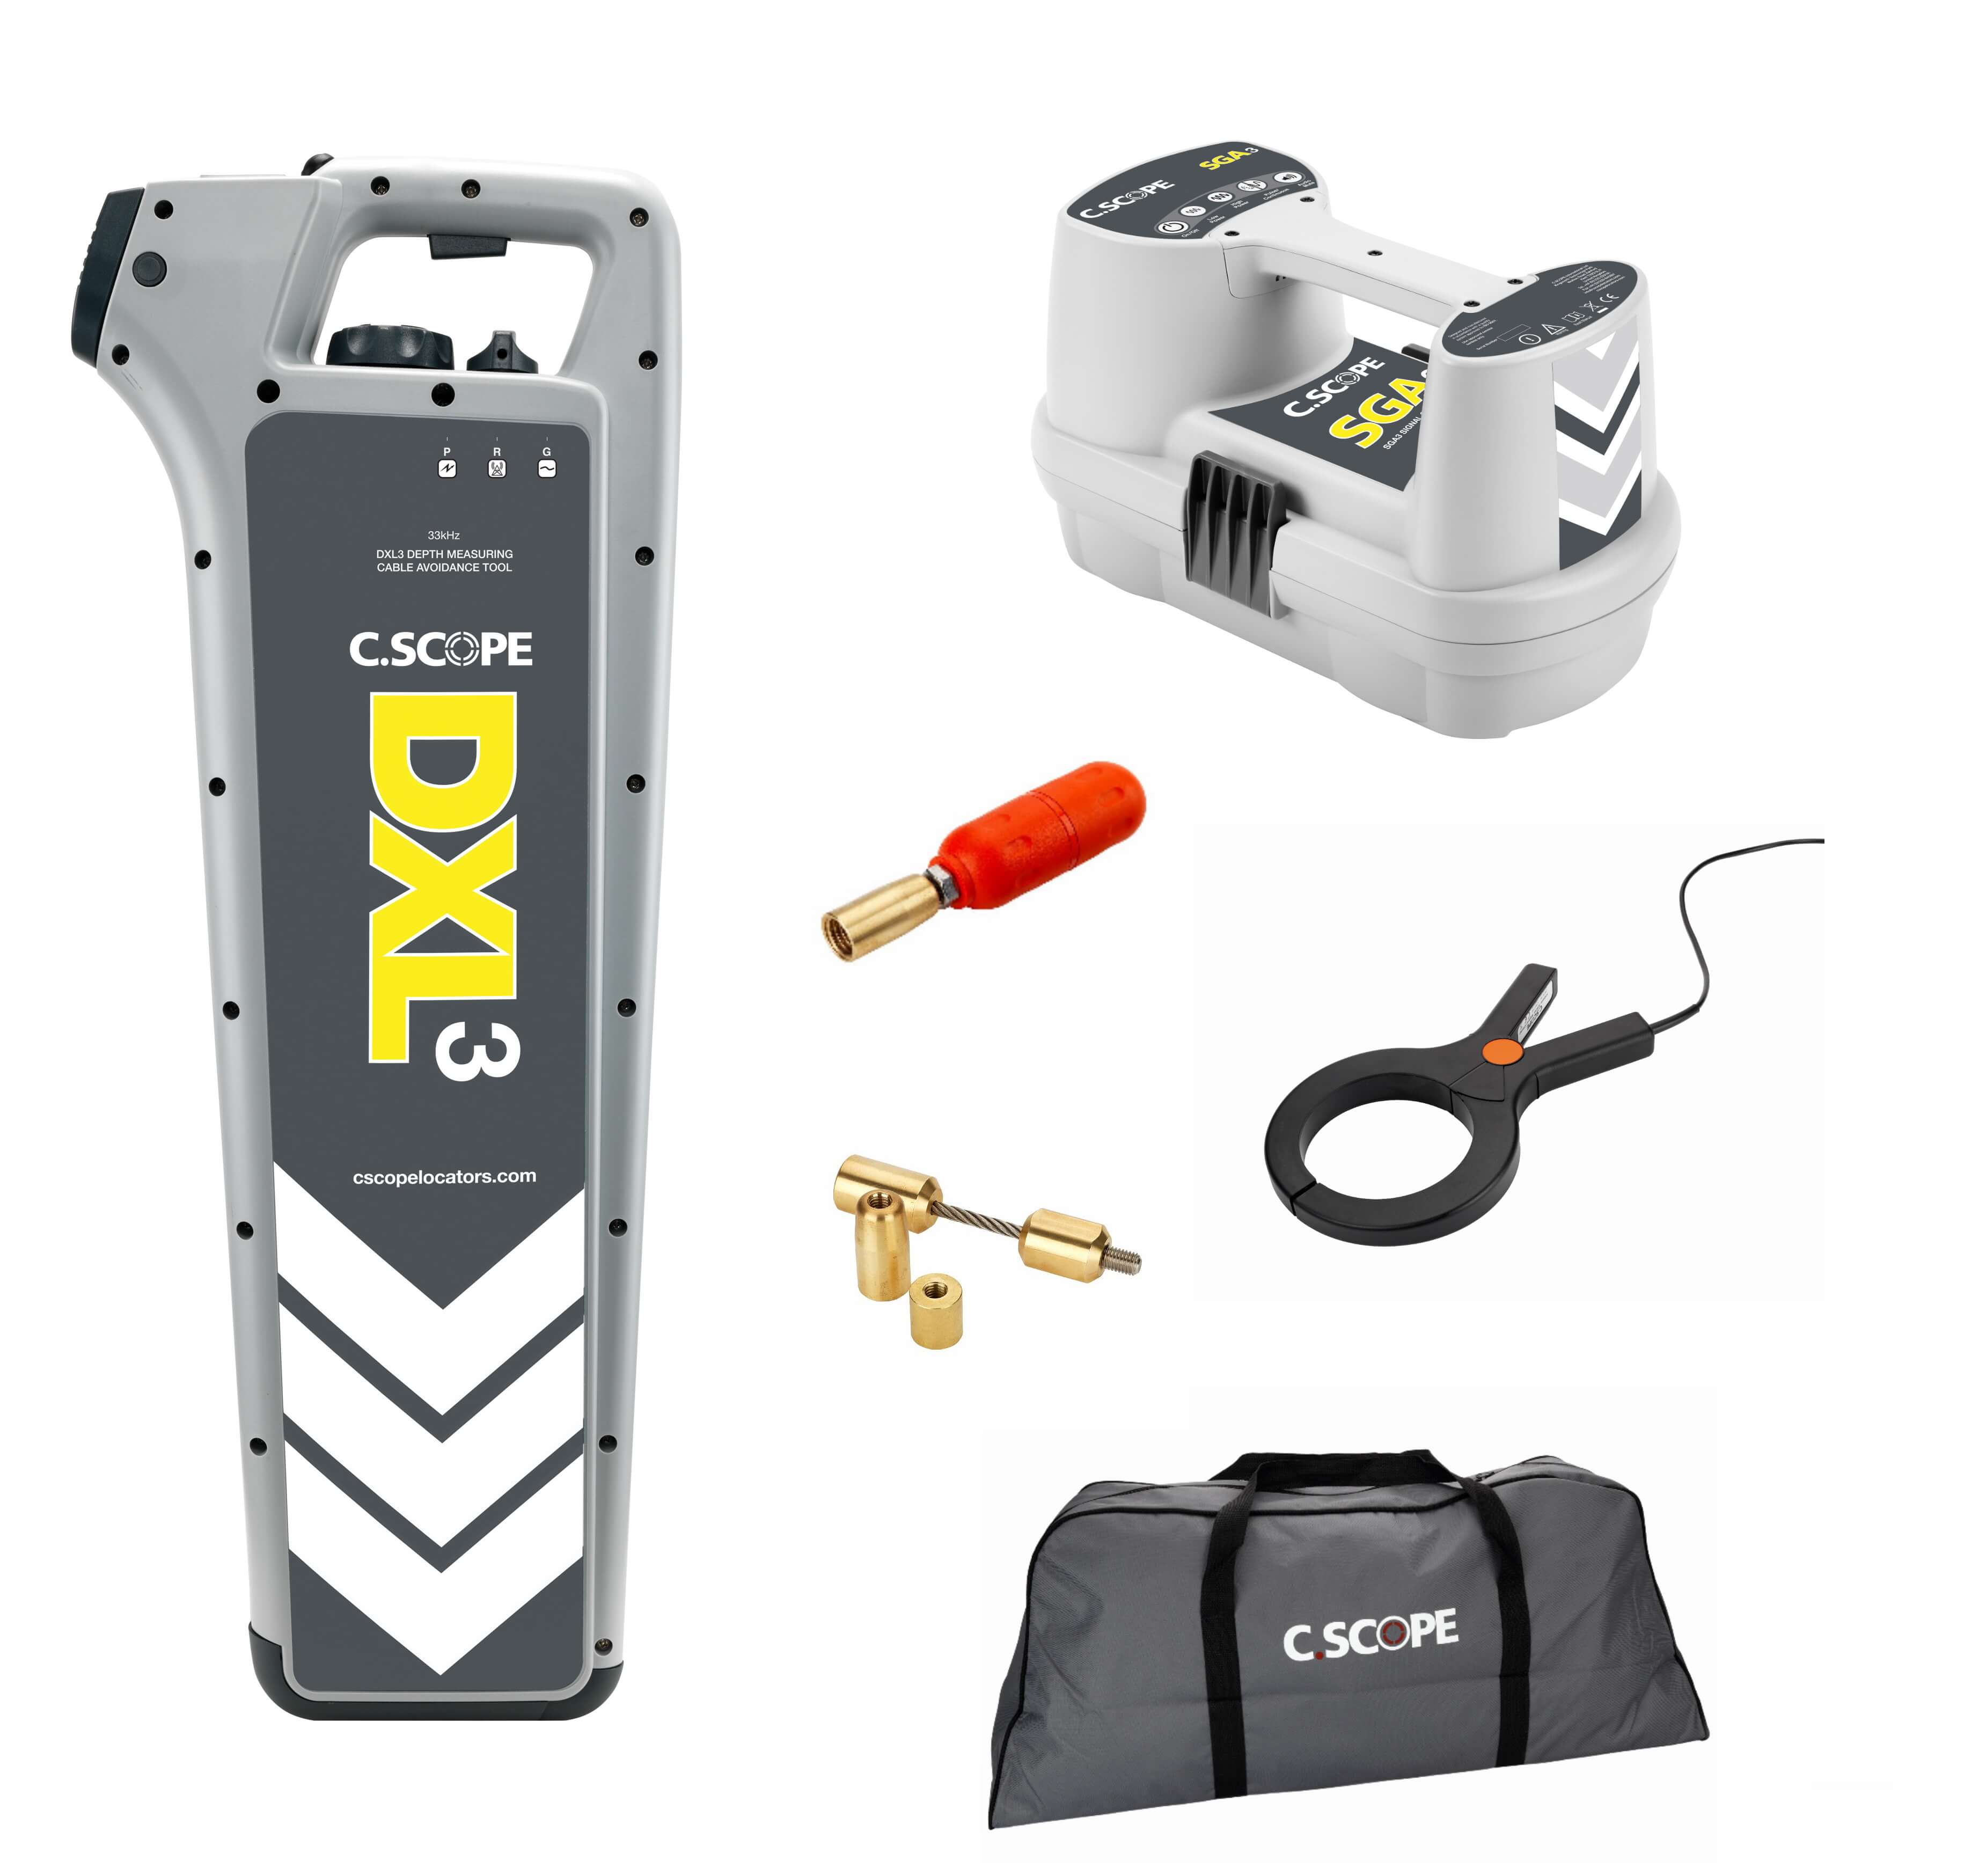 C.Scope DXL3 Top Value Junior Builders Kit with SGA3 Signal Generator and Soft bag - Cable Detector Calibration & Sales